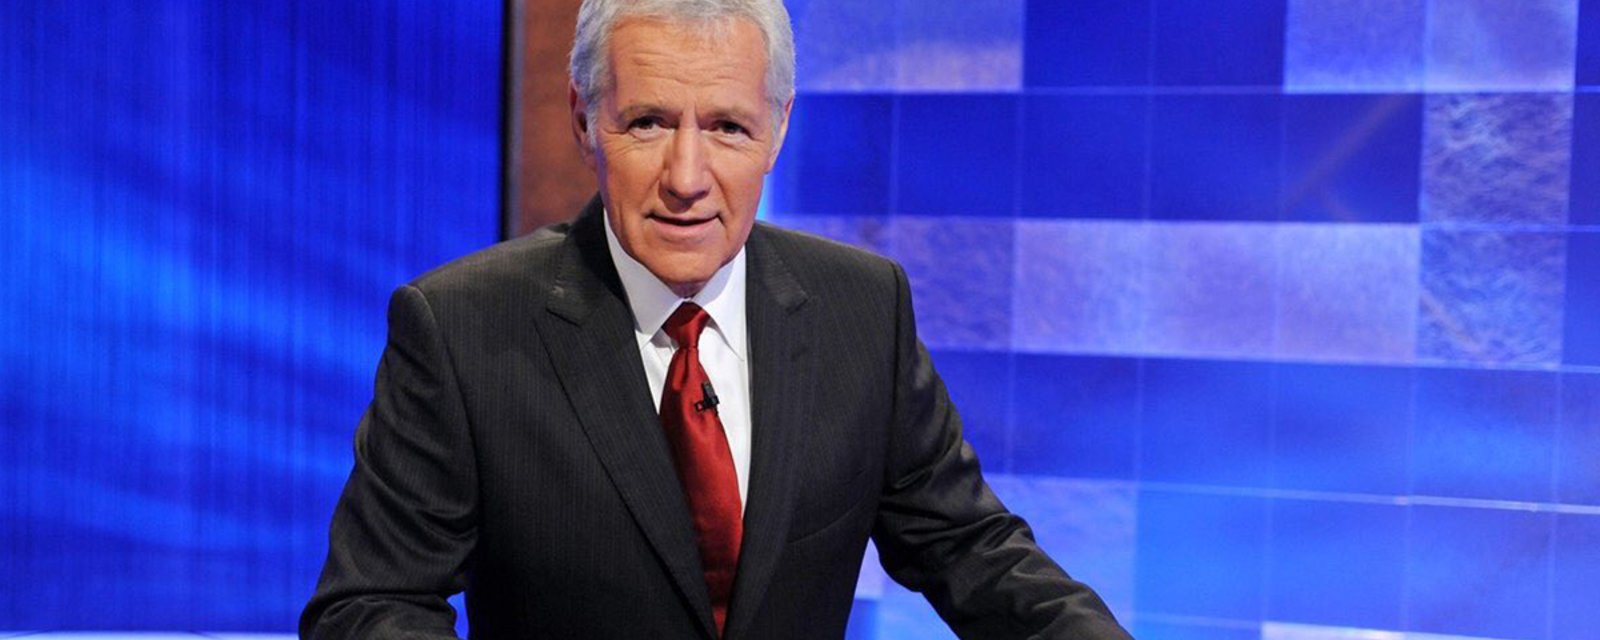 Jeopardy host, proud Canadian and lifelong hockey fan Alex Trebek announces that he has stage 4 cancer